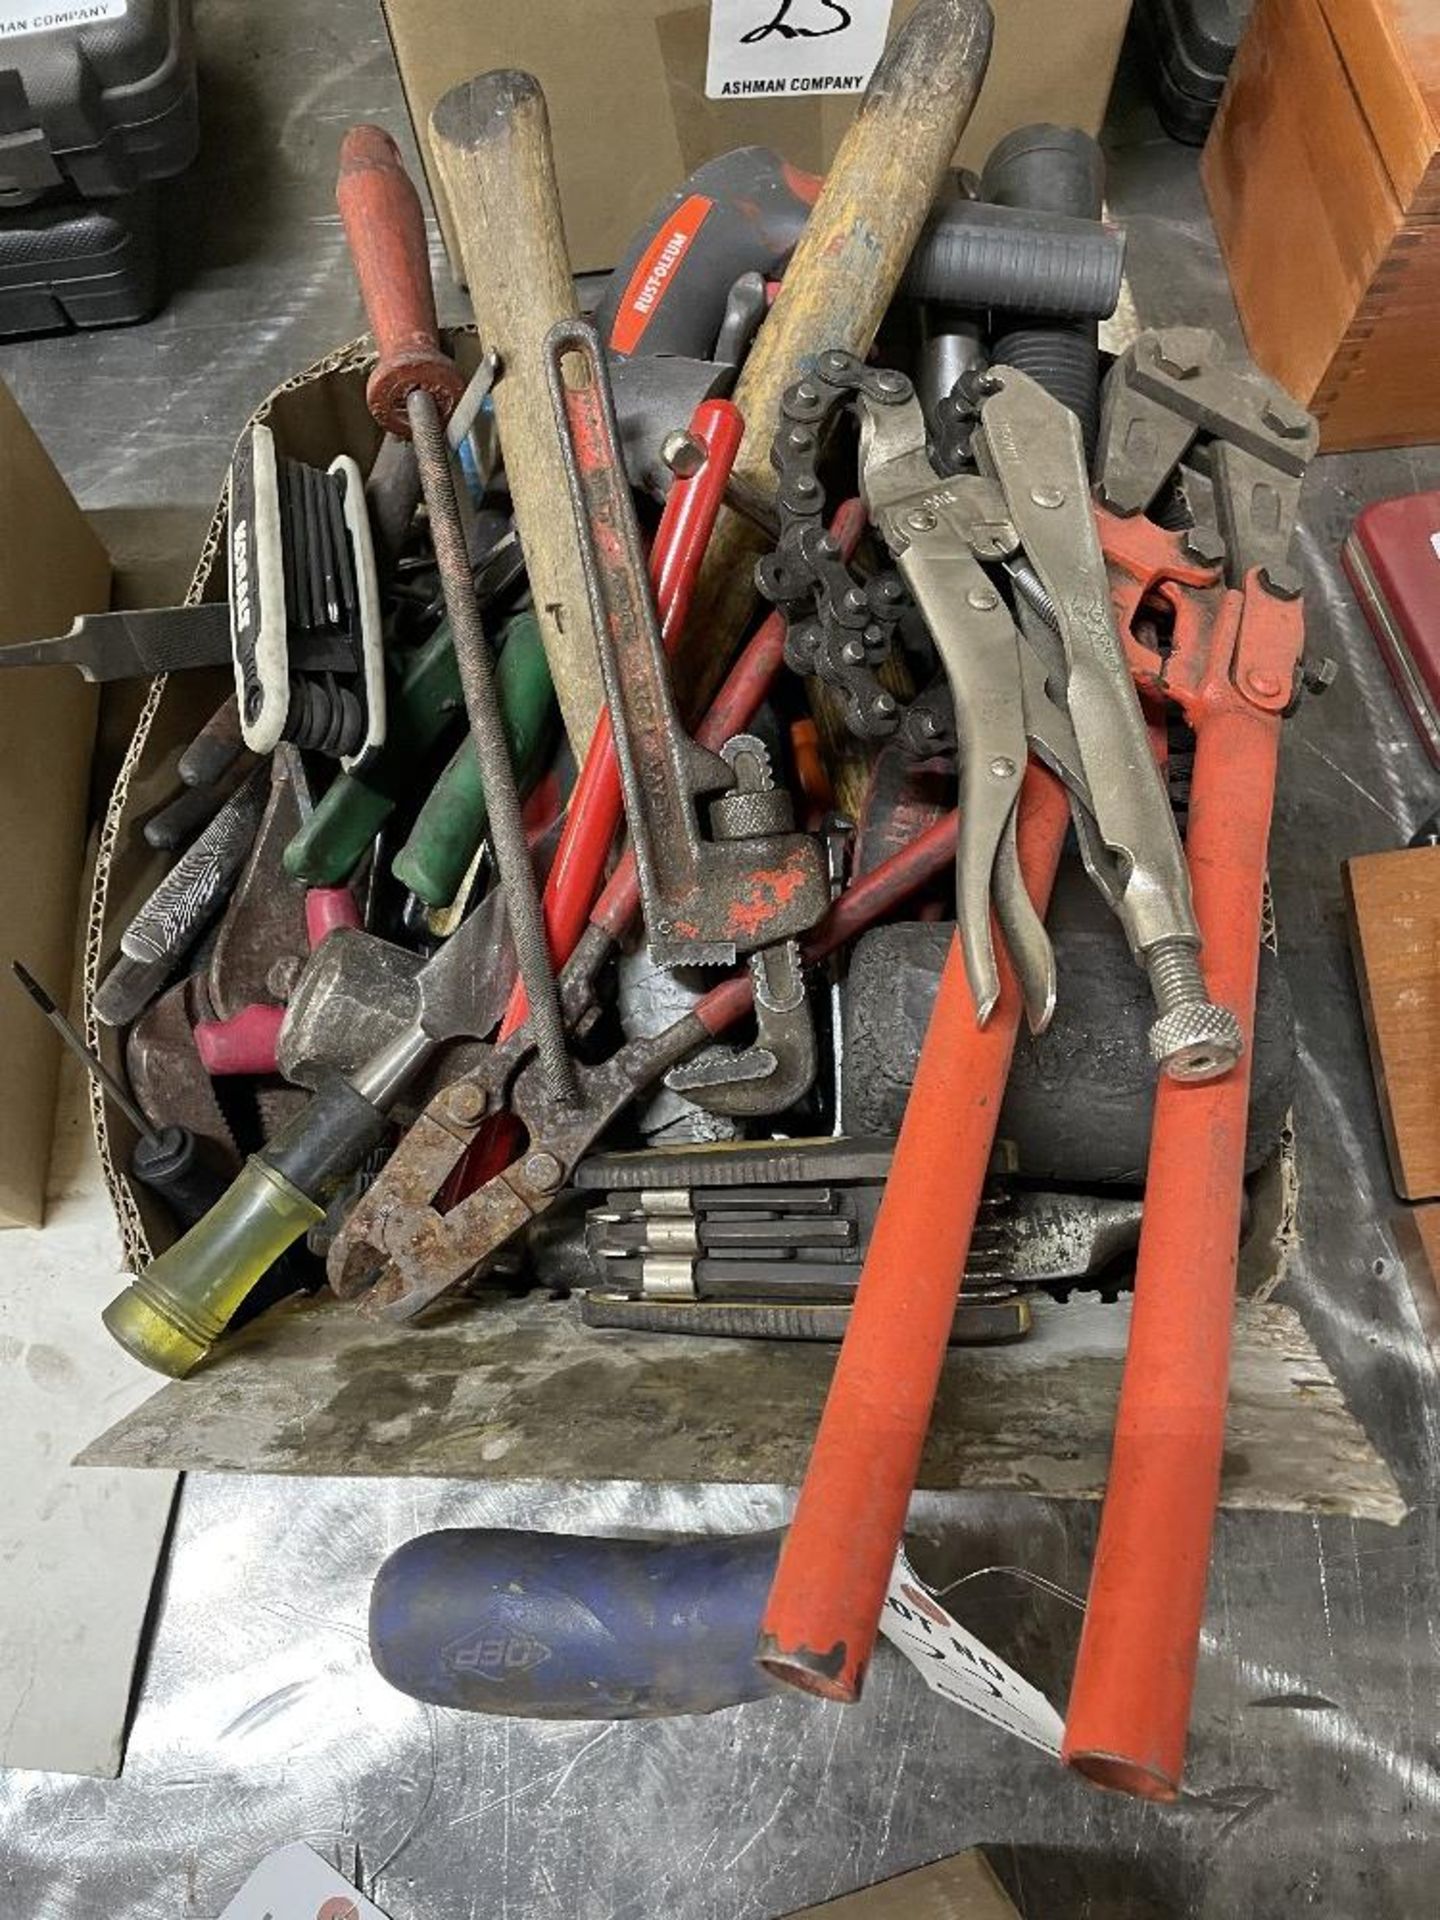 Lot of misc hand tools- hammers, wrenches, screw drivers, Allen wrenches, pliers